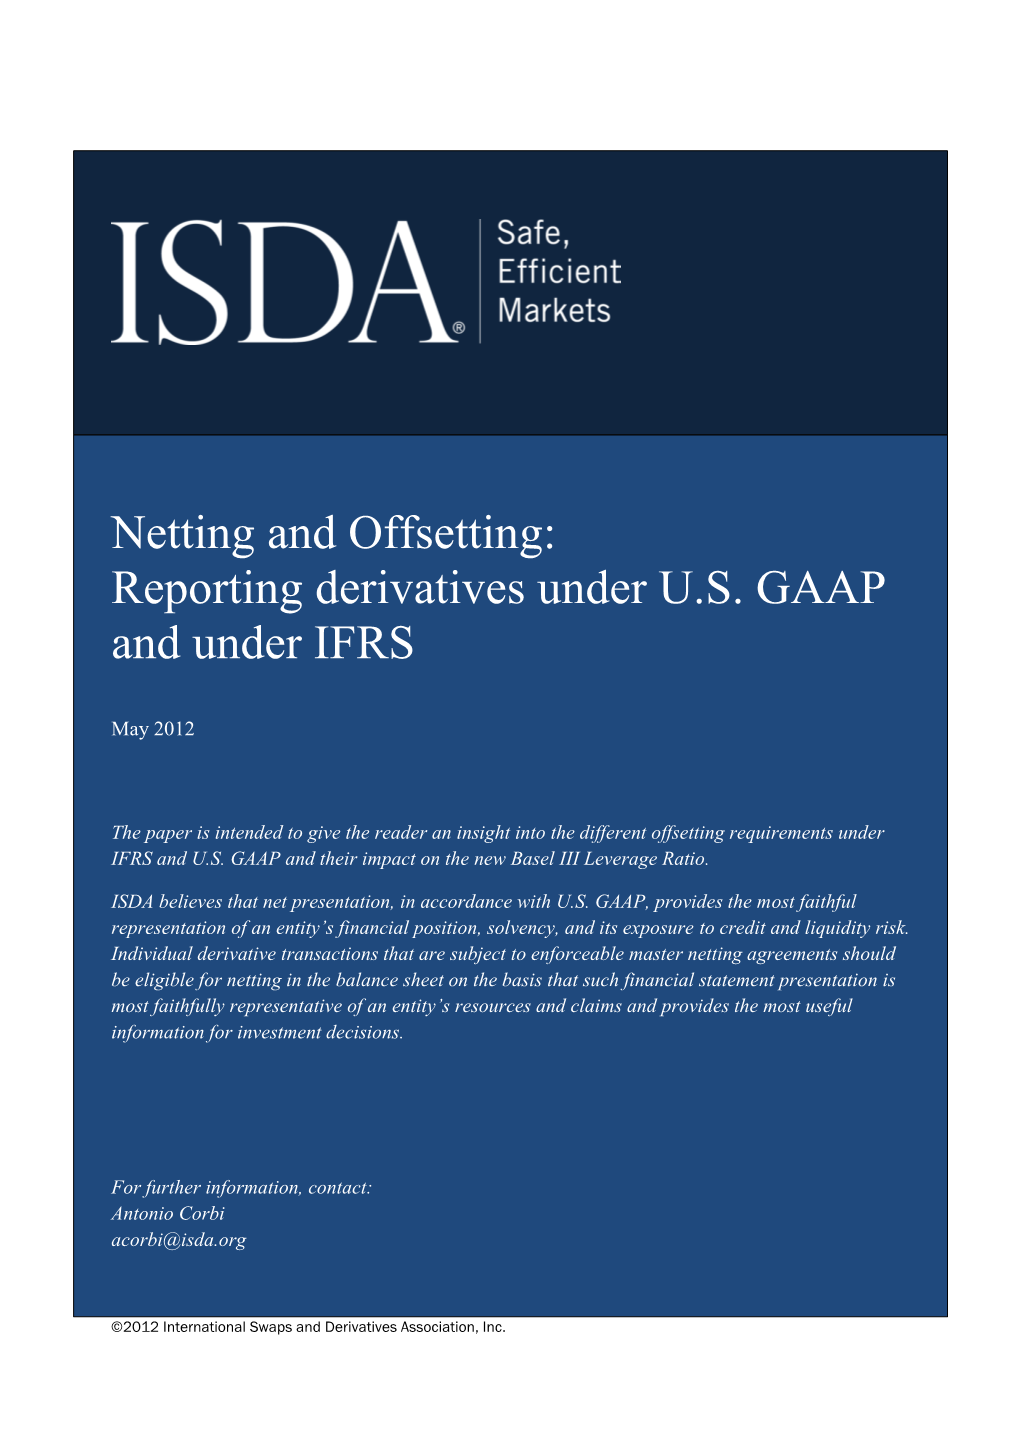 Offsetting Under US GAAP and IFRS